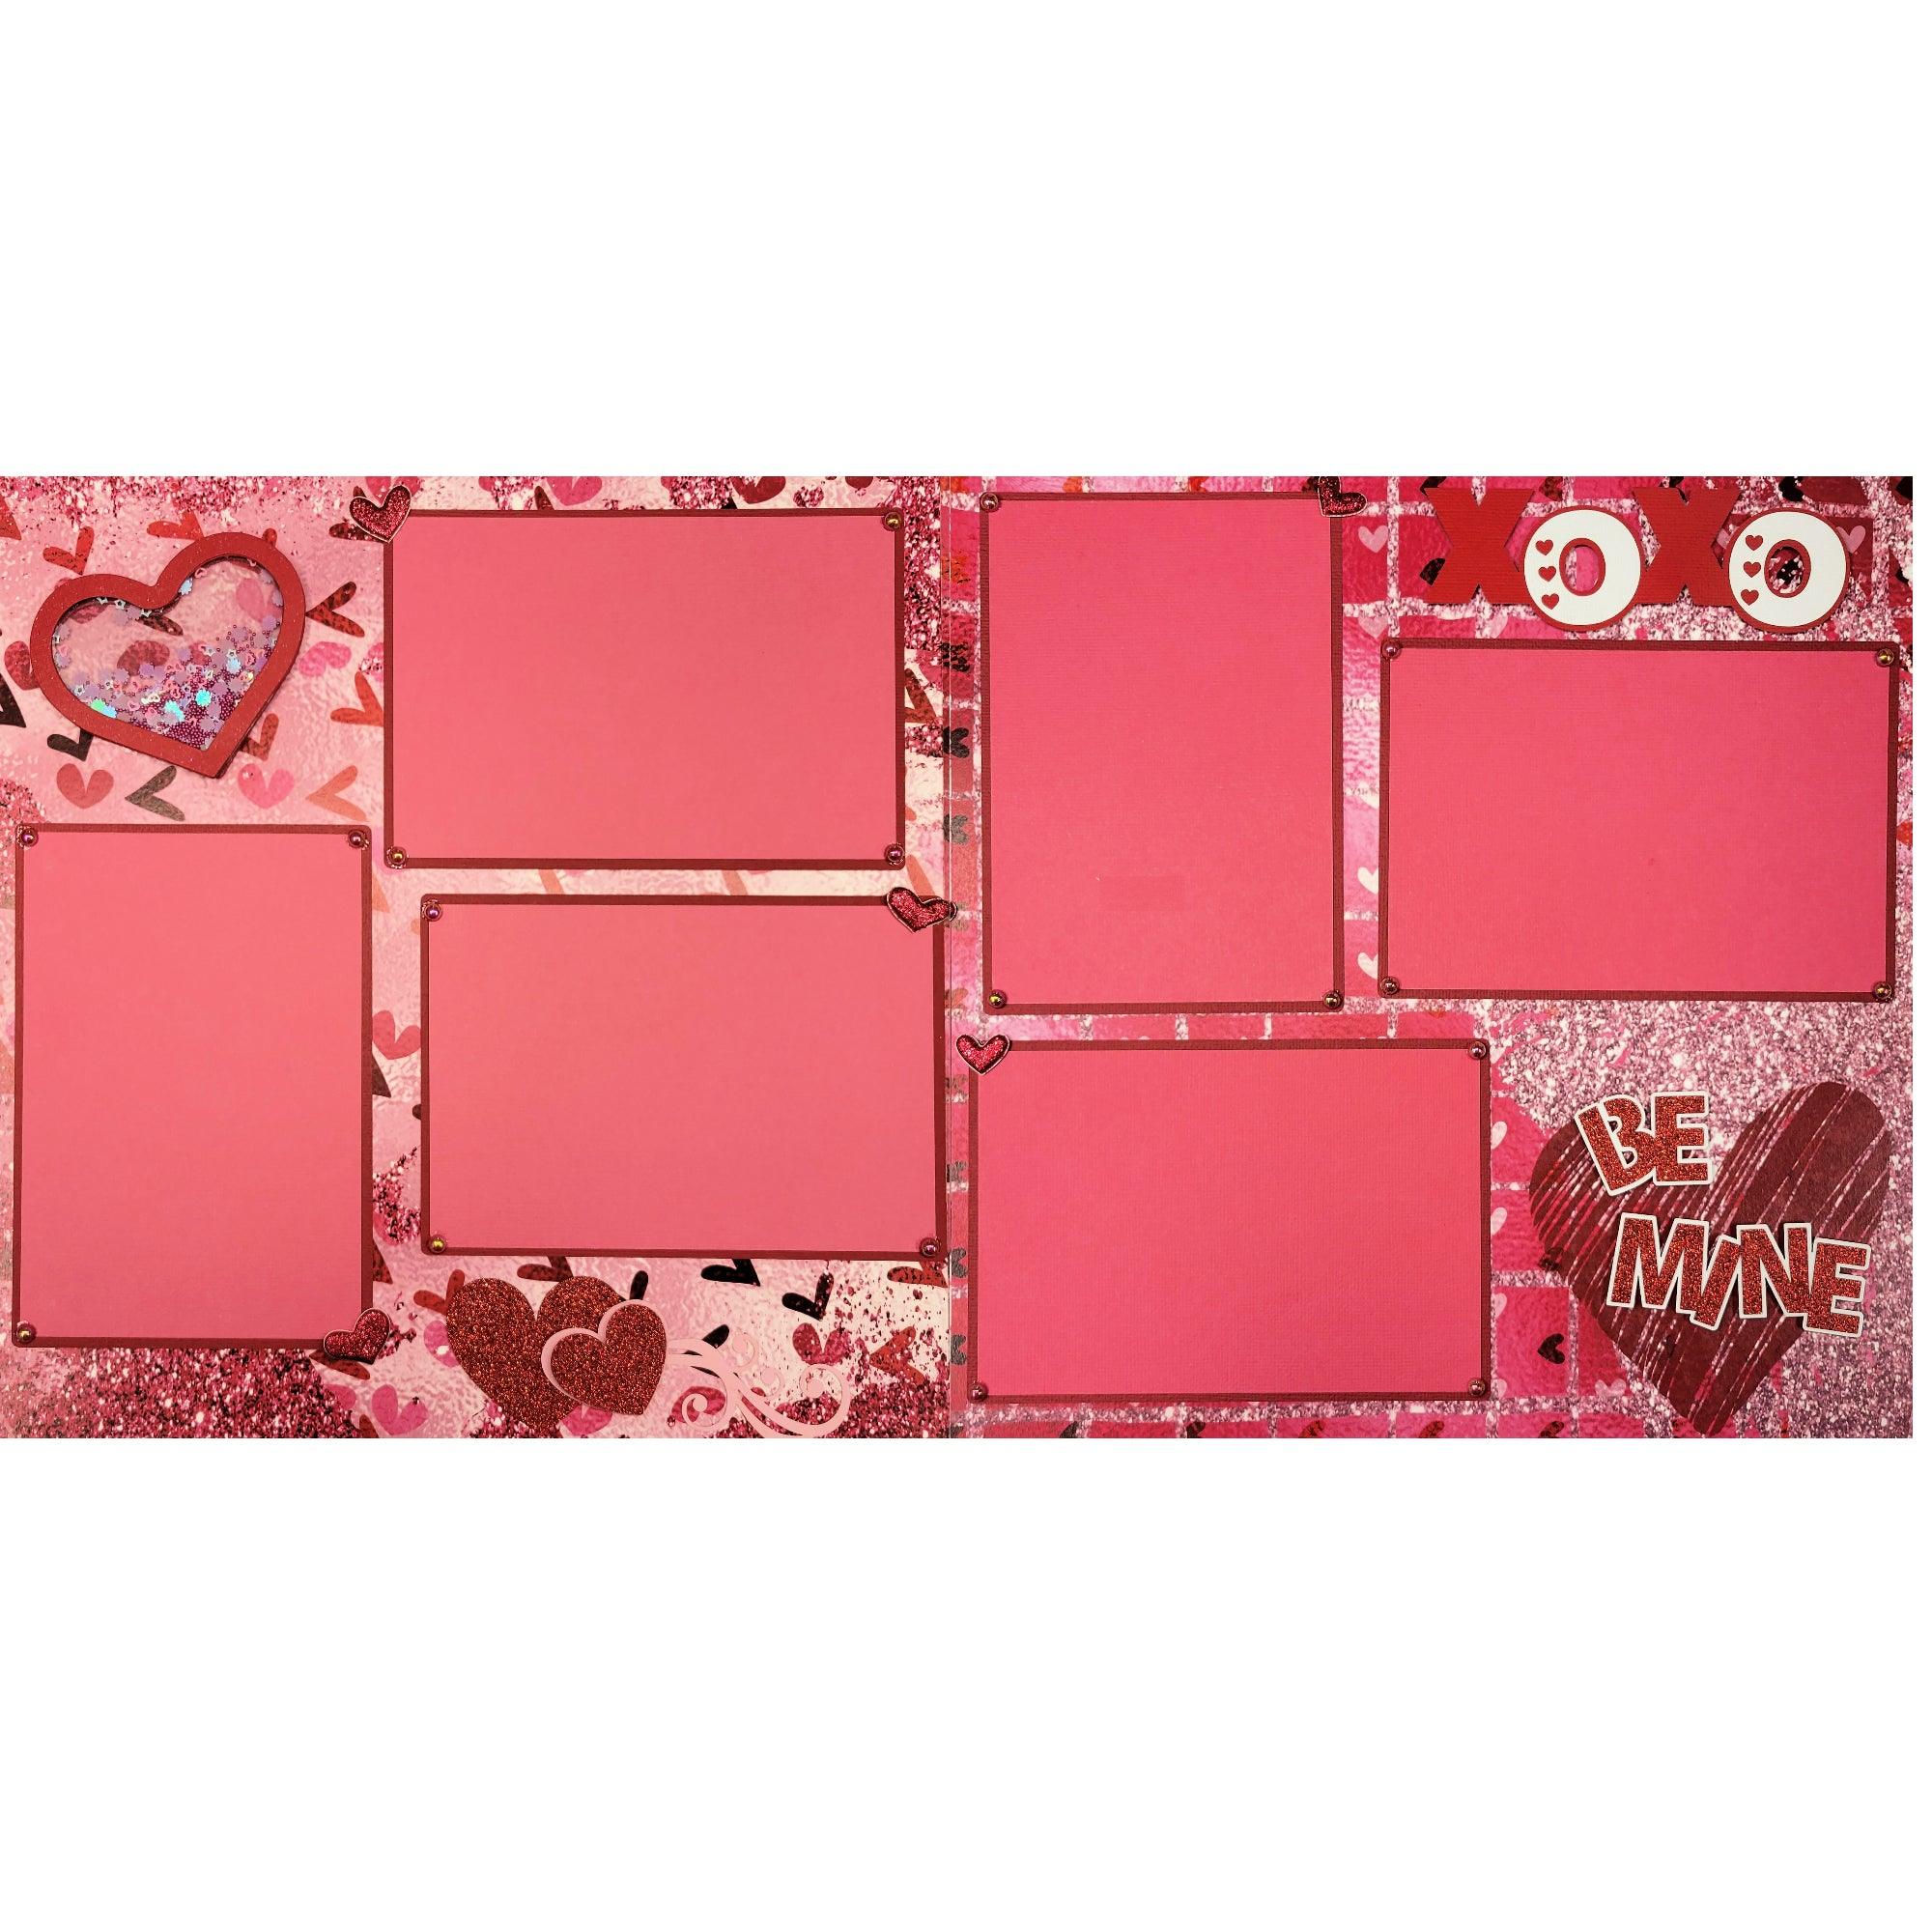 Be Mine Valentine with Shaker Heart  (2) - 12 x 12 Pages, Fully-Assembled & Hand-Crafted 3D Scrapbook Premade by SSC Designs